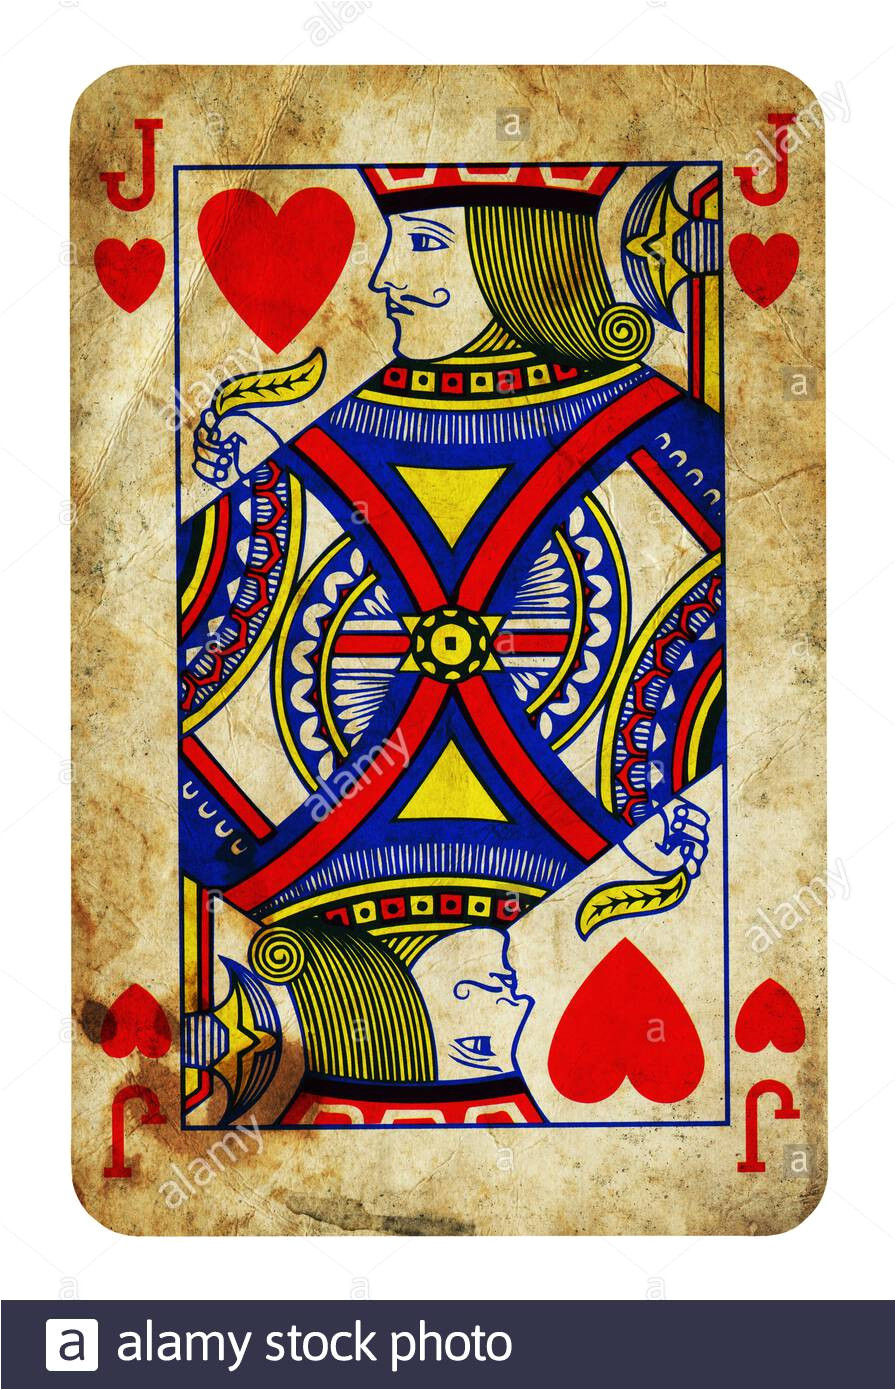 jack of hearts vintage playing card isolated on white clipping path included 2arp65n jpg